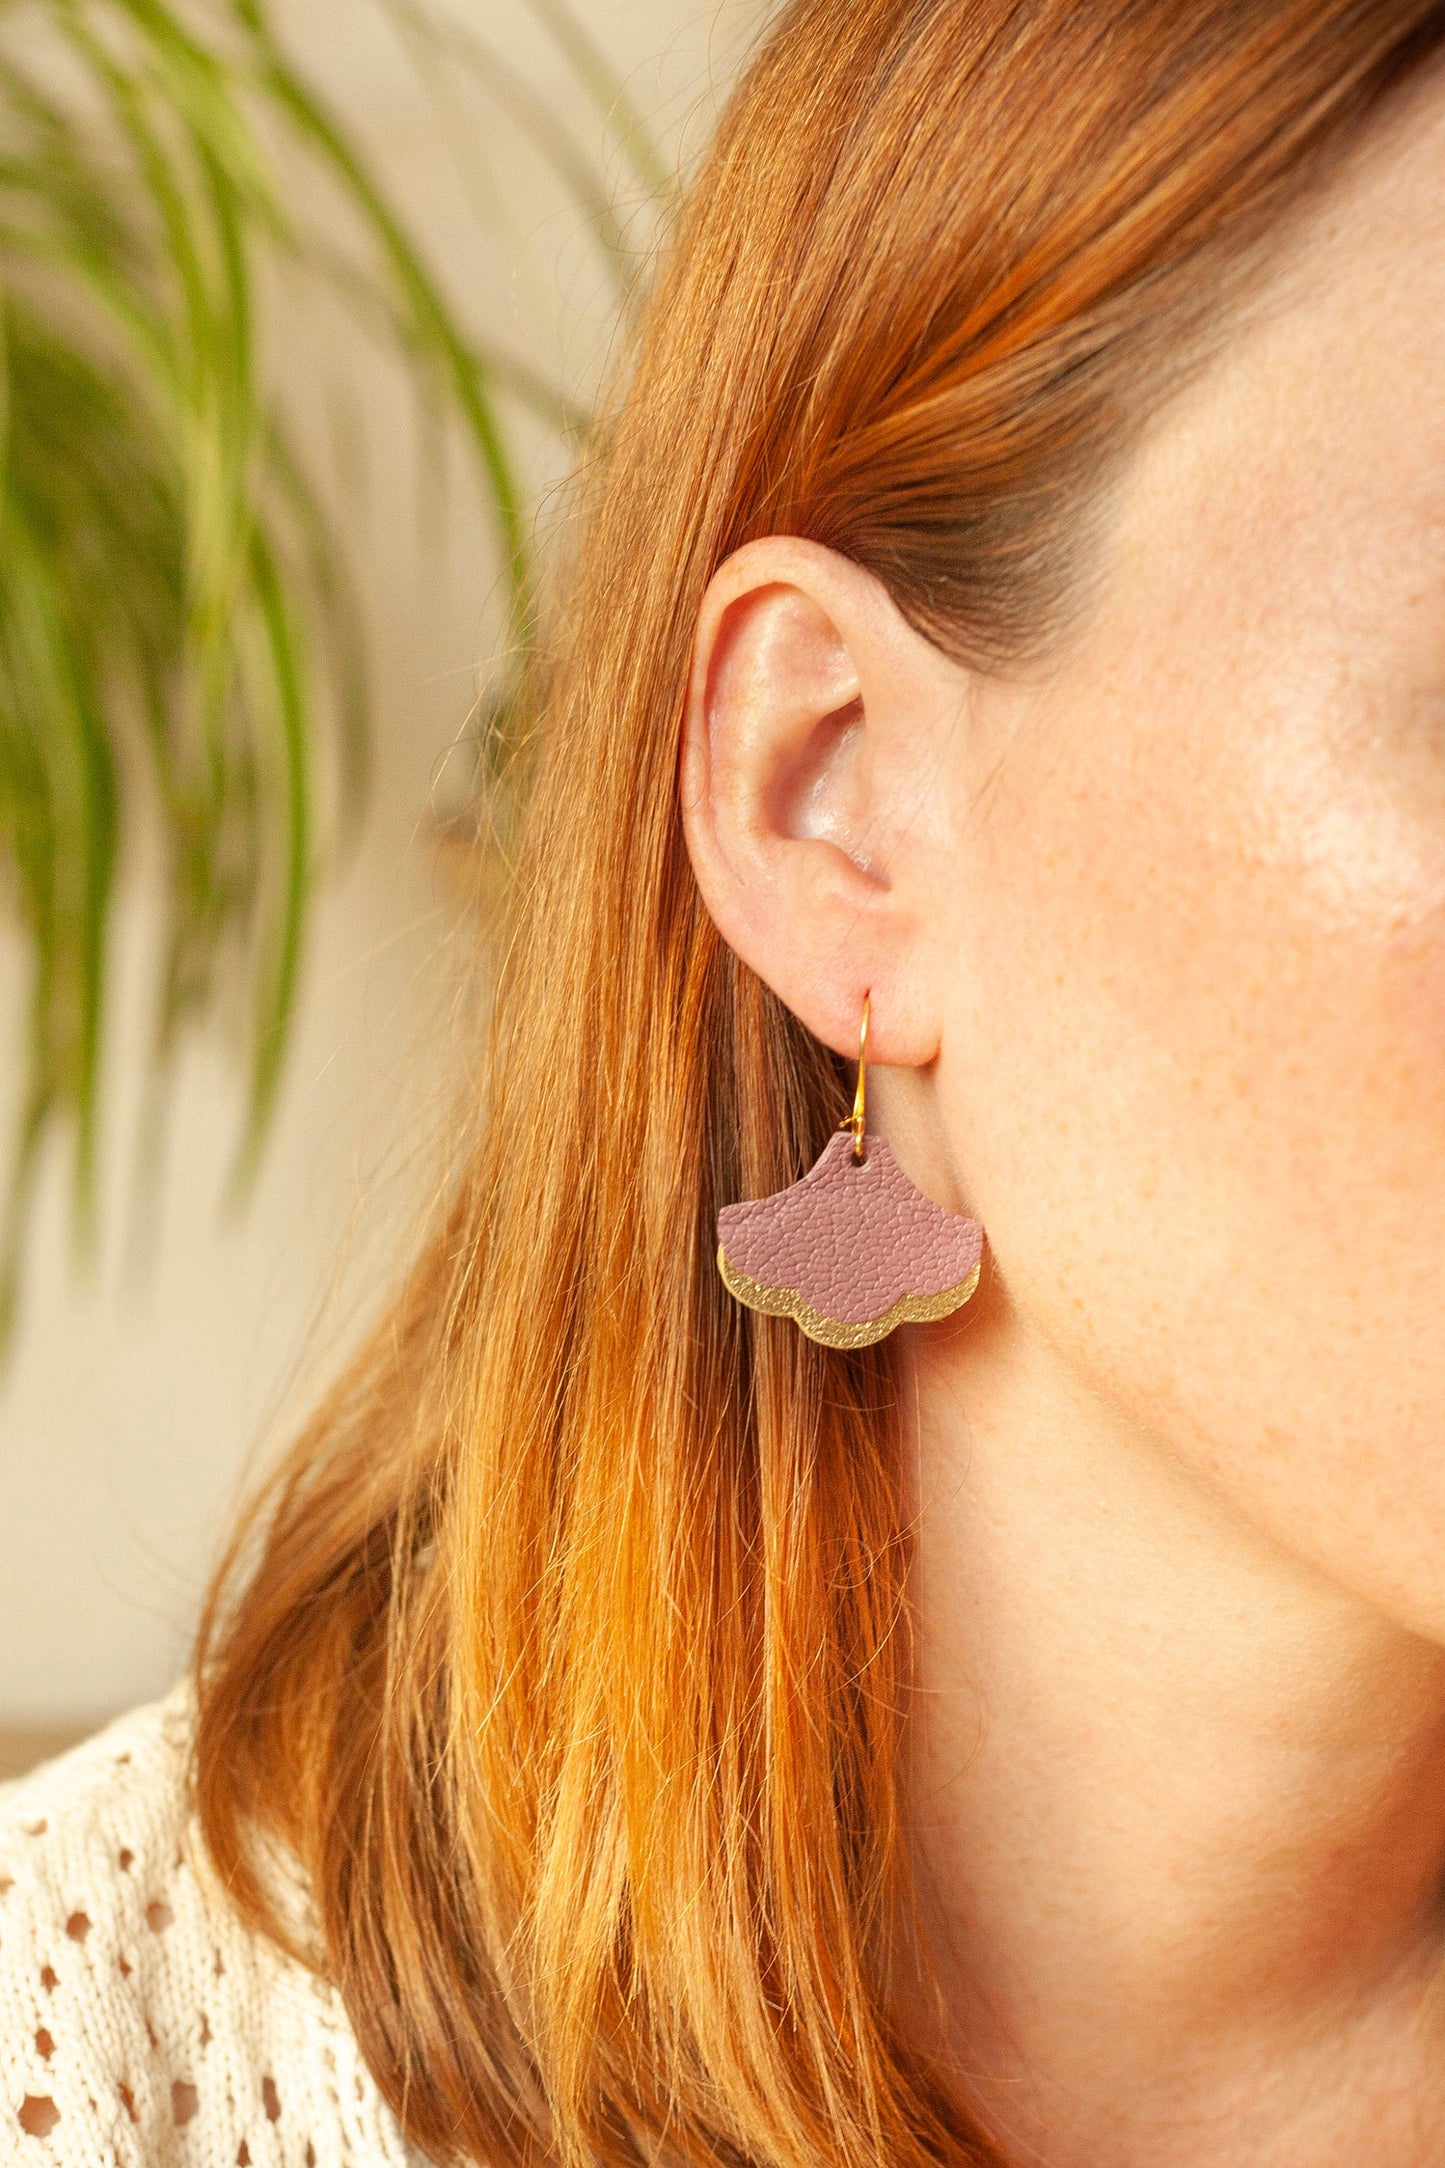 Ginkgo Biloba earrings in pink and gold leather